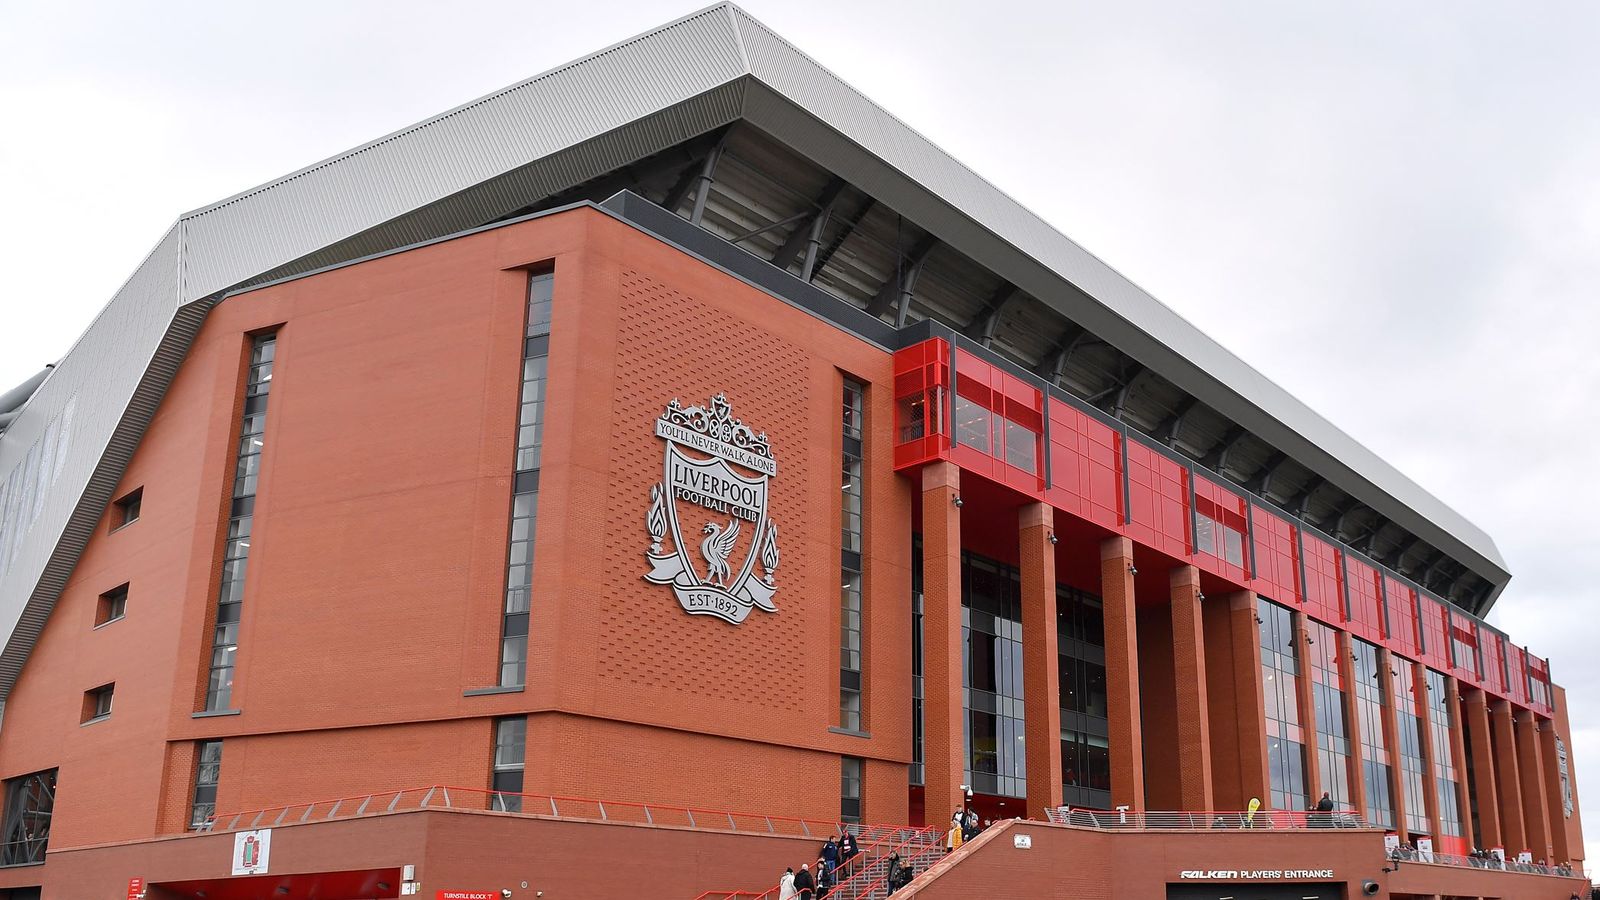 Liverpool Women to face Everton at Anfield in Merseyside derby in September live on Sky